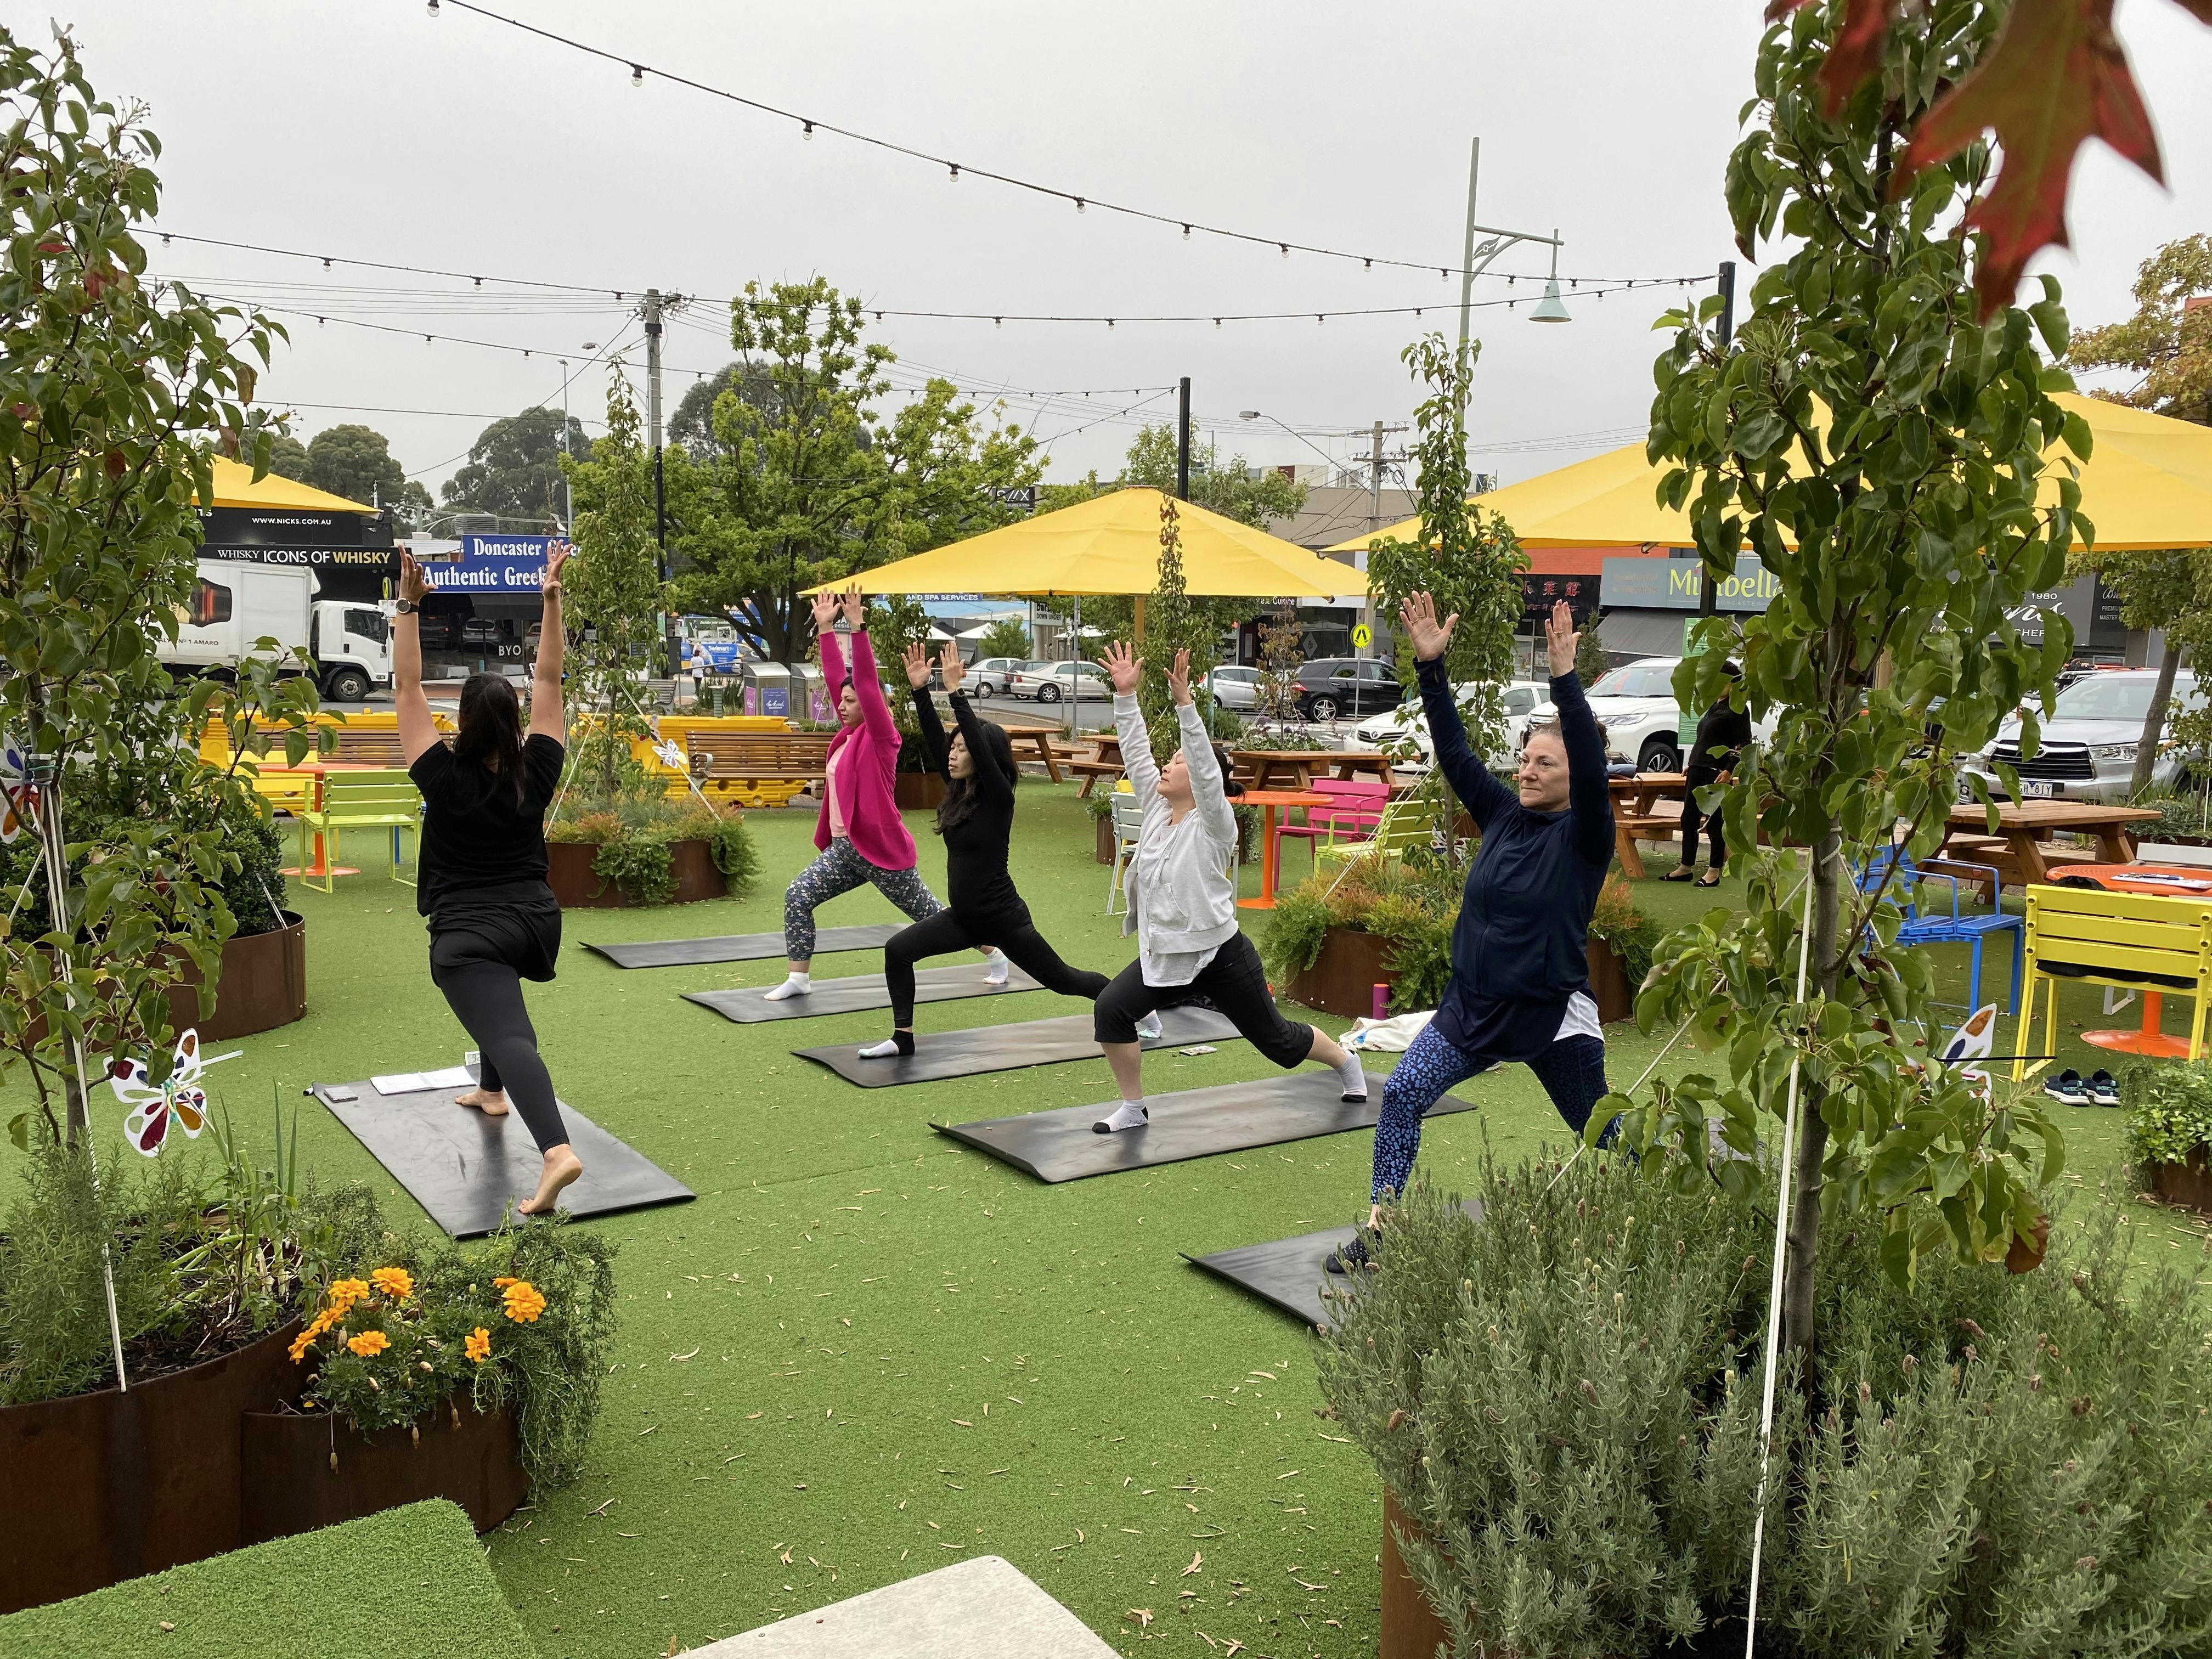 Yoga in the Jackson Court Pop-Up Park